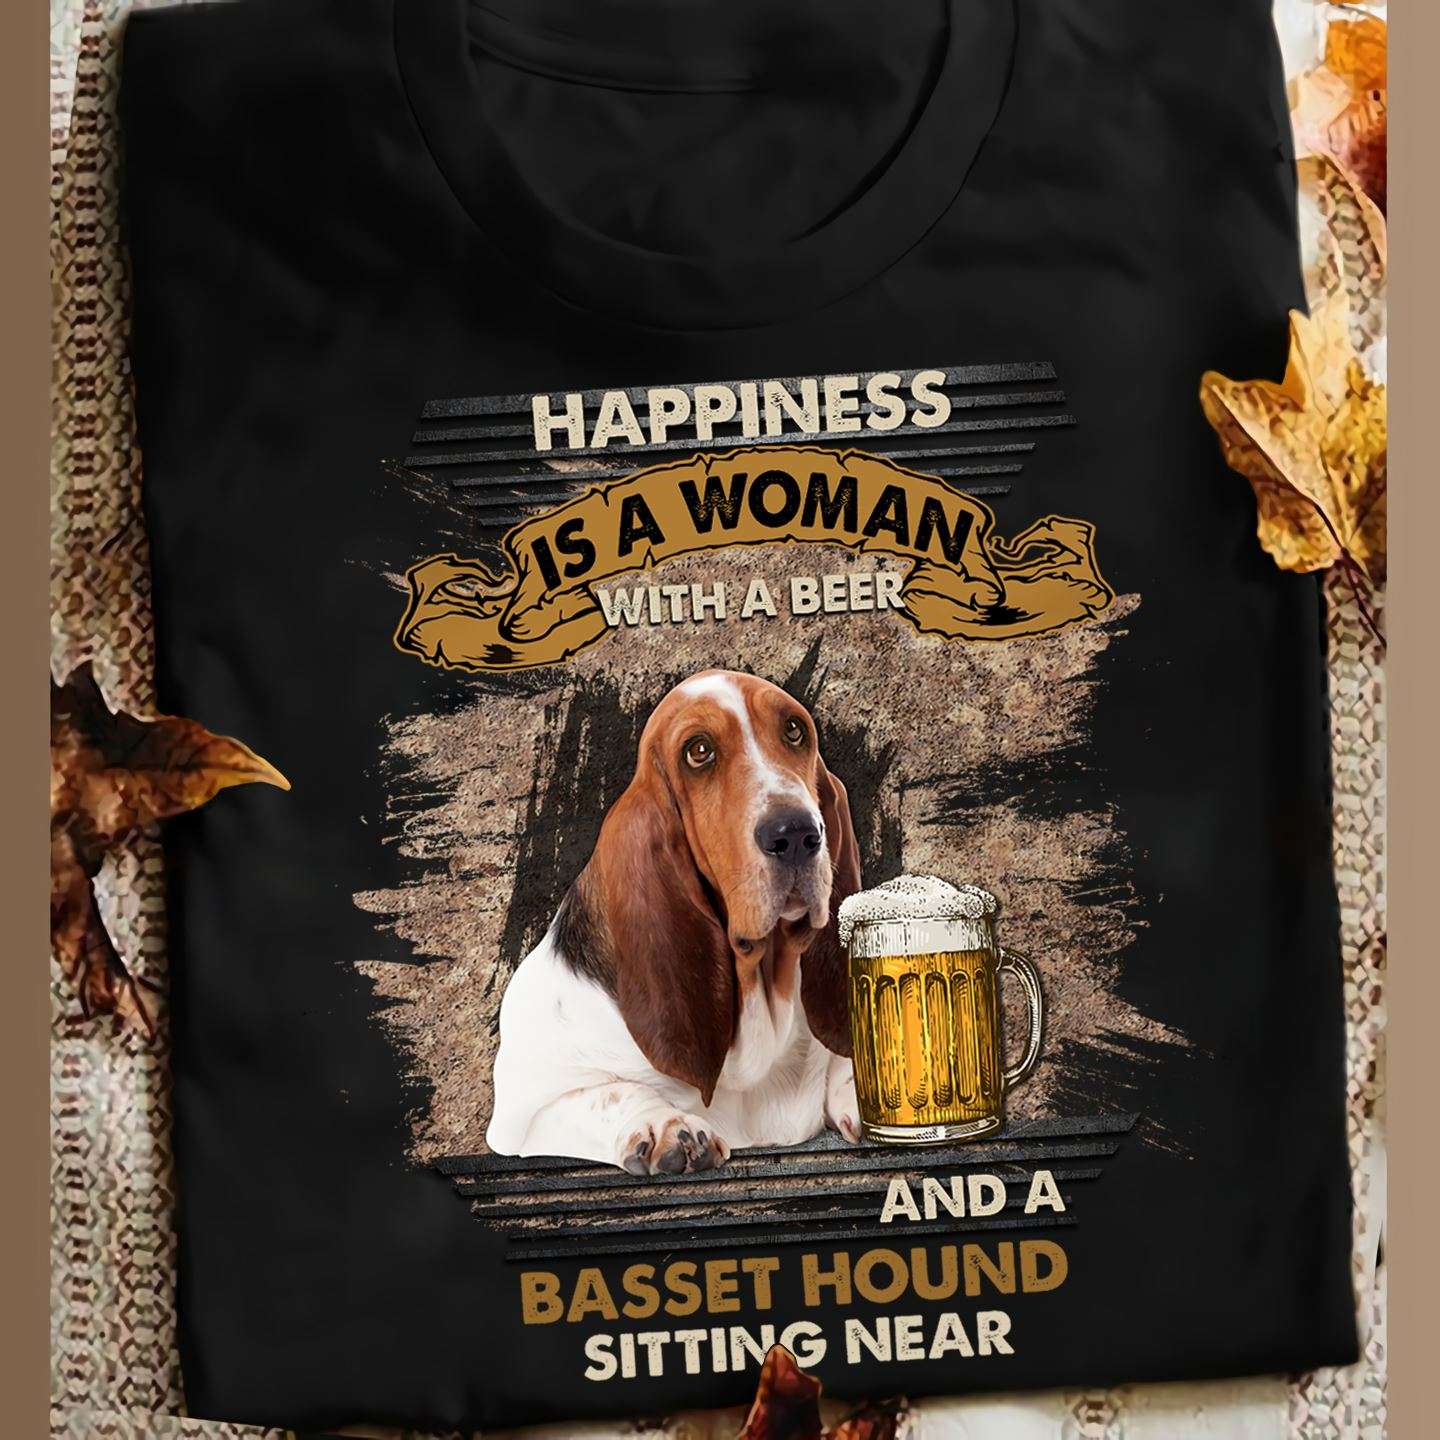 Basset Hound Beer - Happiness is a woman with a beer and a basset hound sitting near